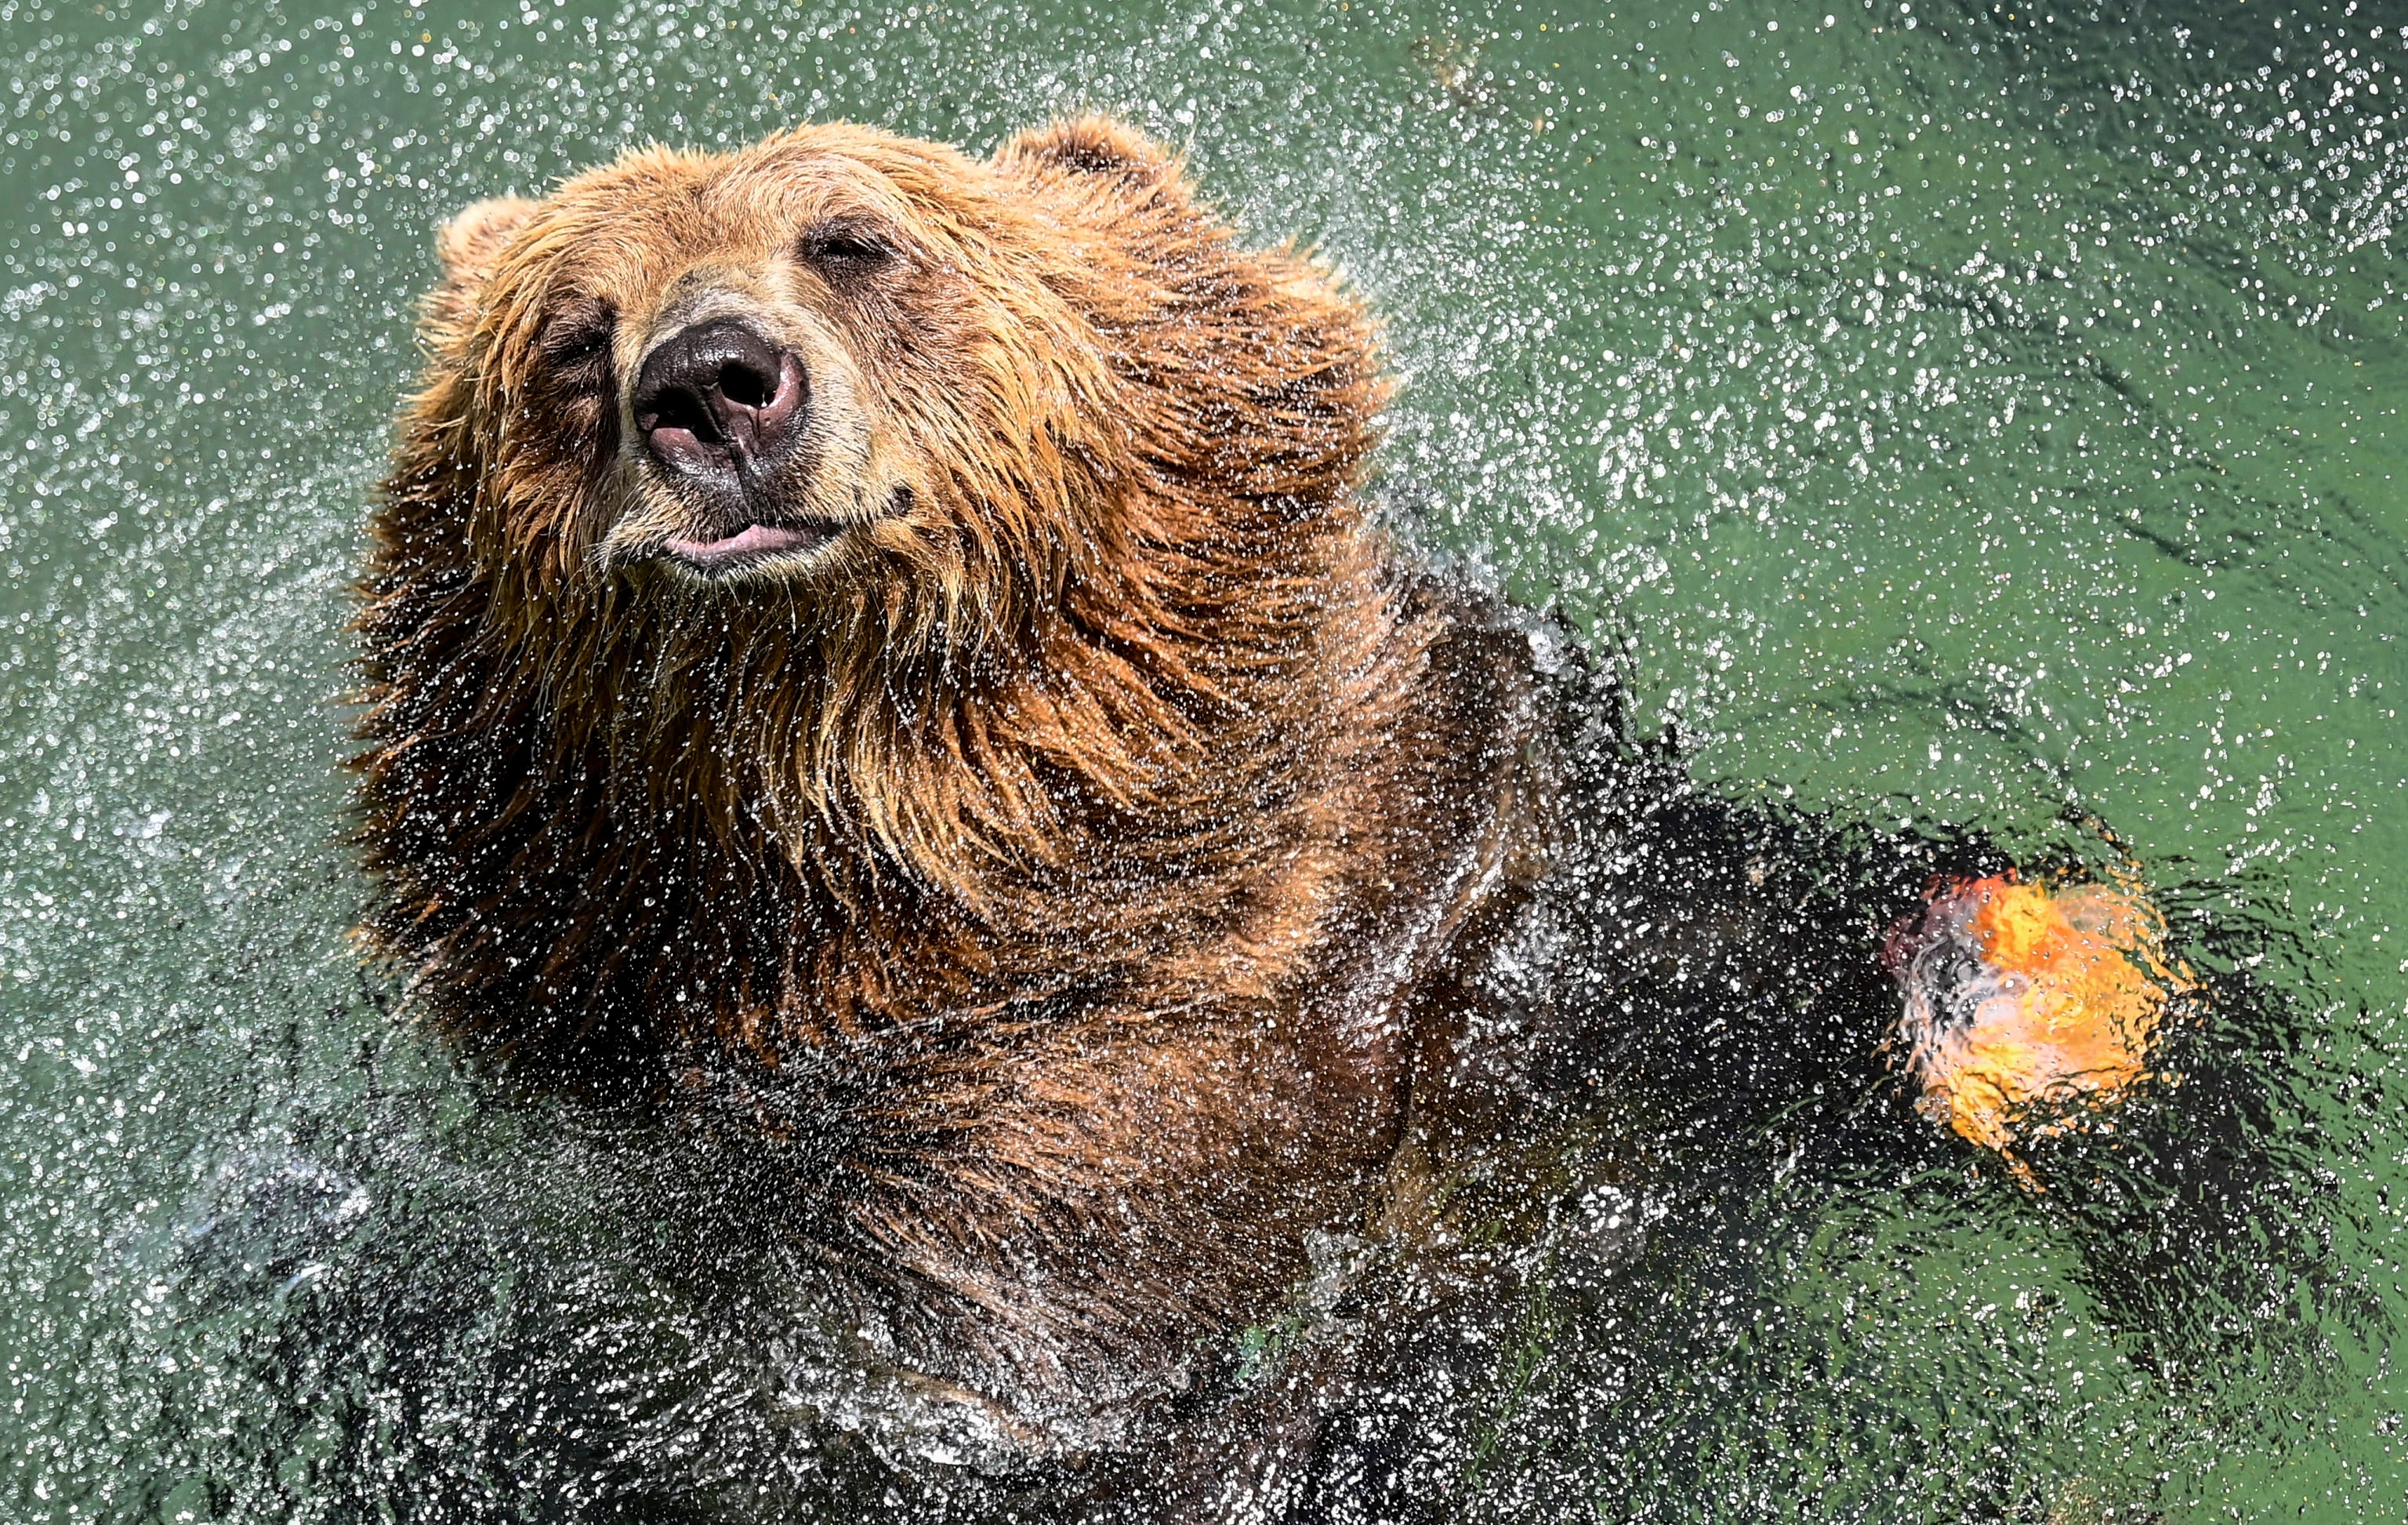 A brown bear cools off in a pool at the Rome Zoo during a heatwave.